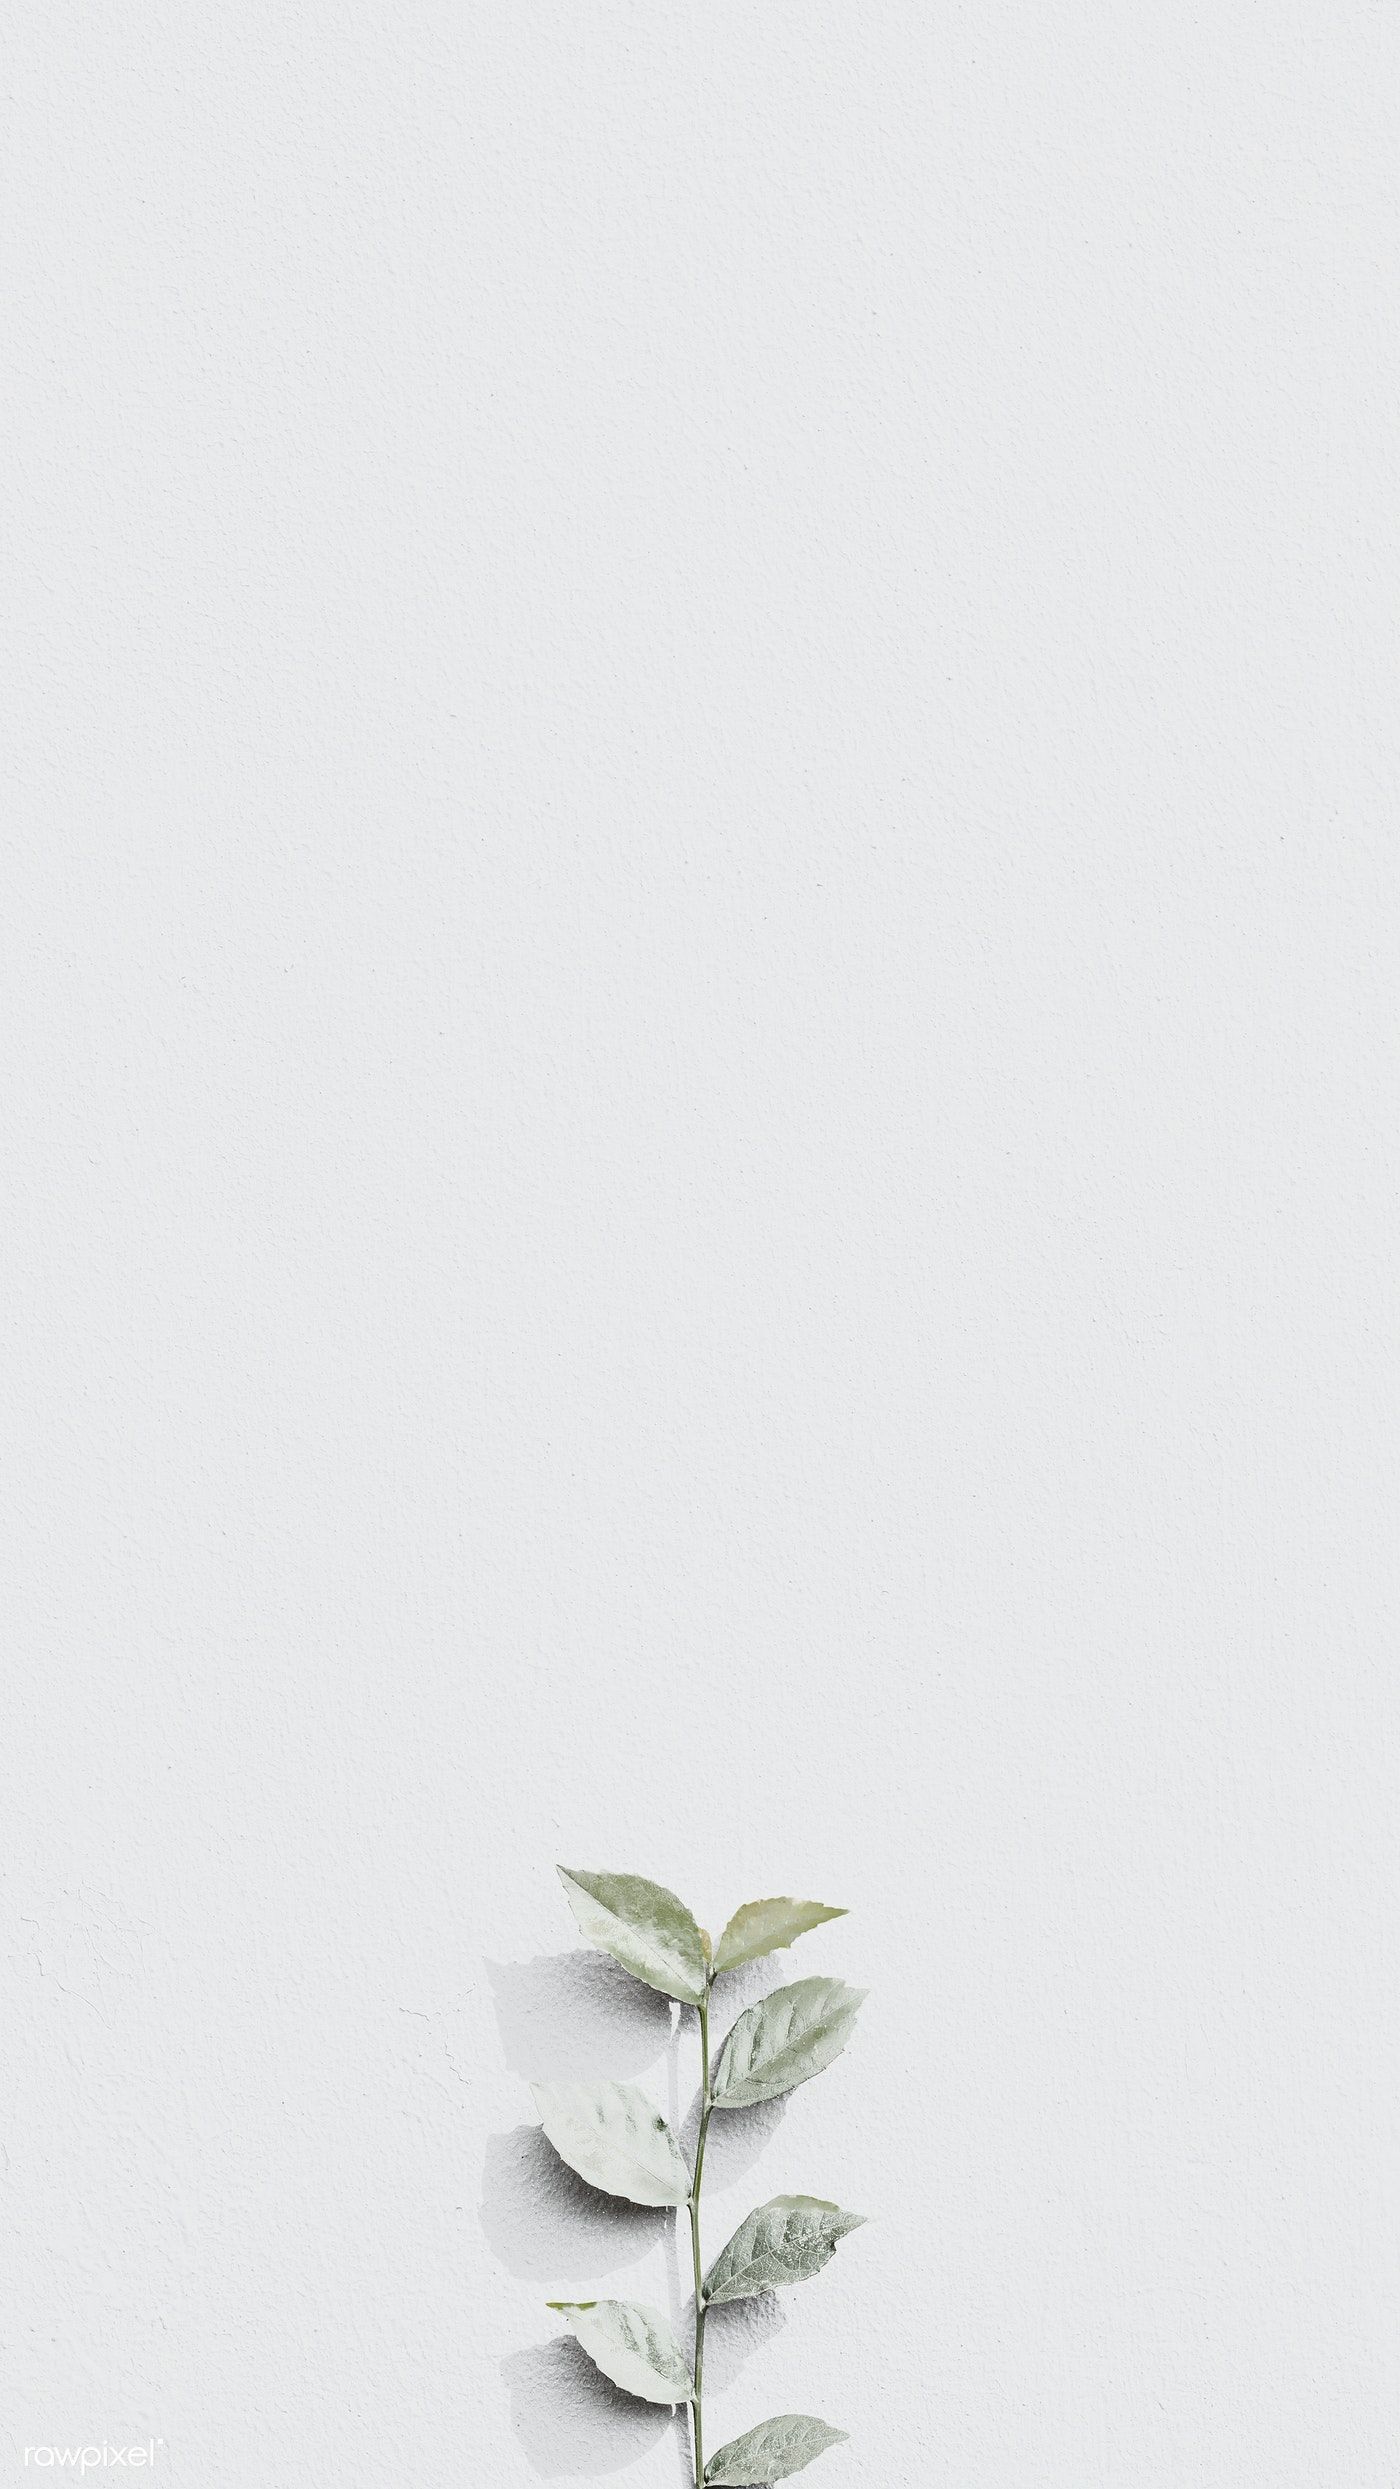 A small plant sitting on top of the ground - Gray